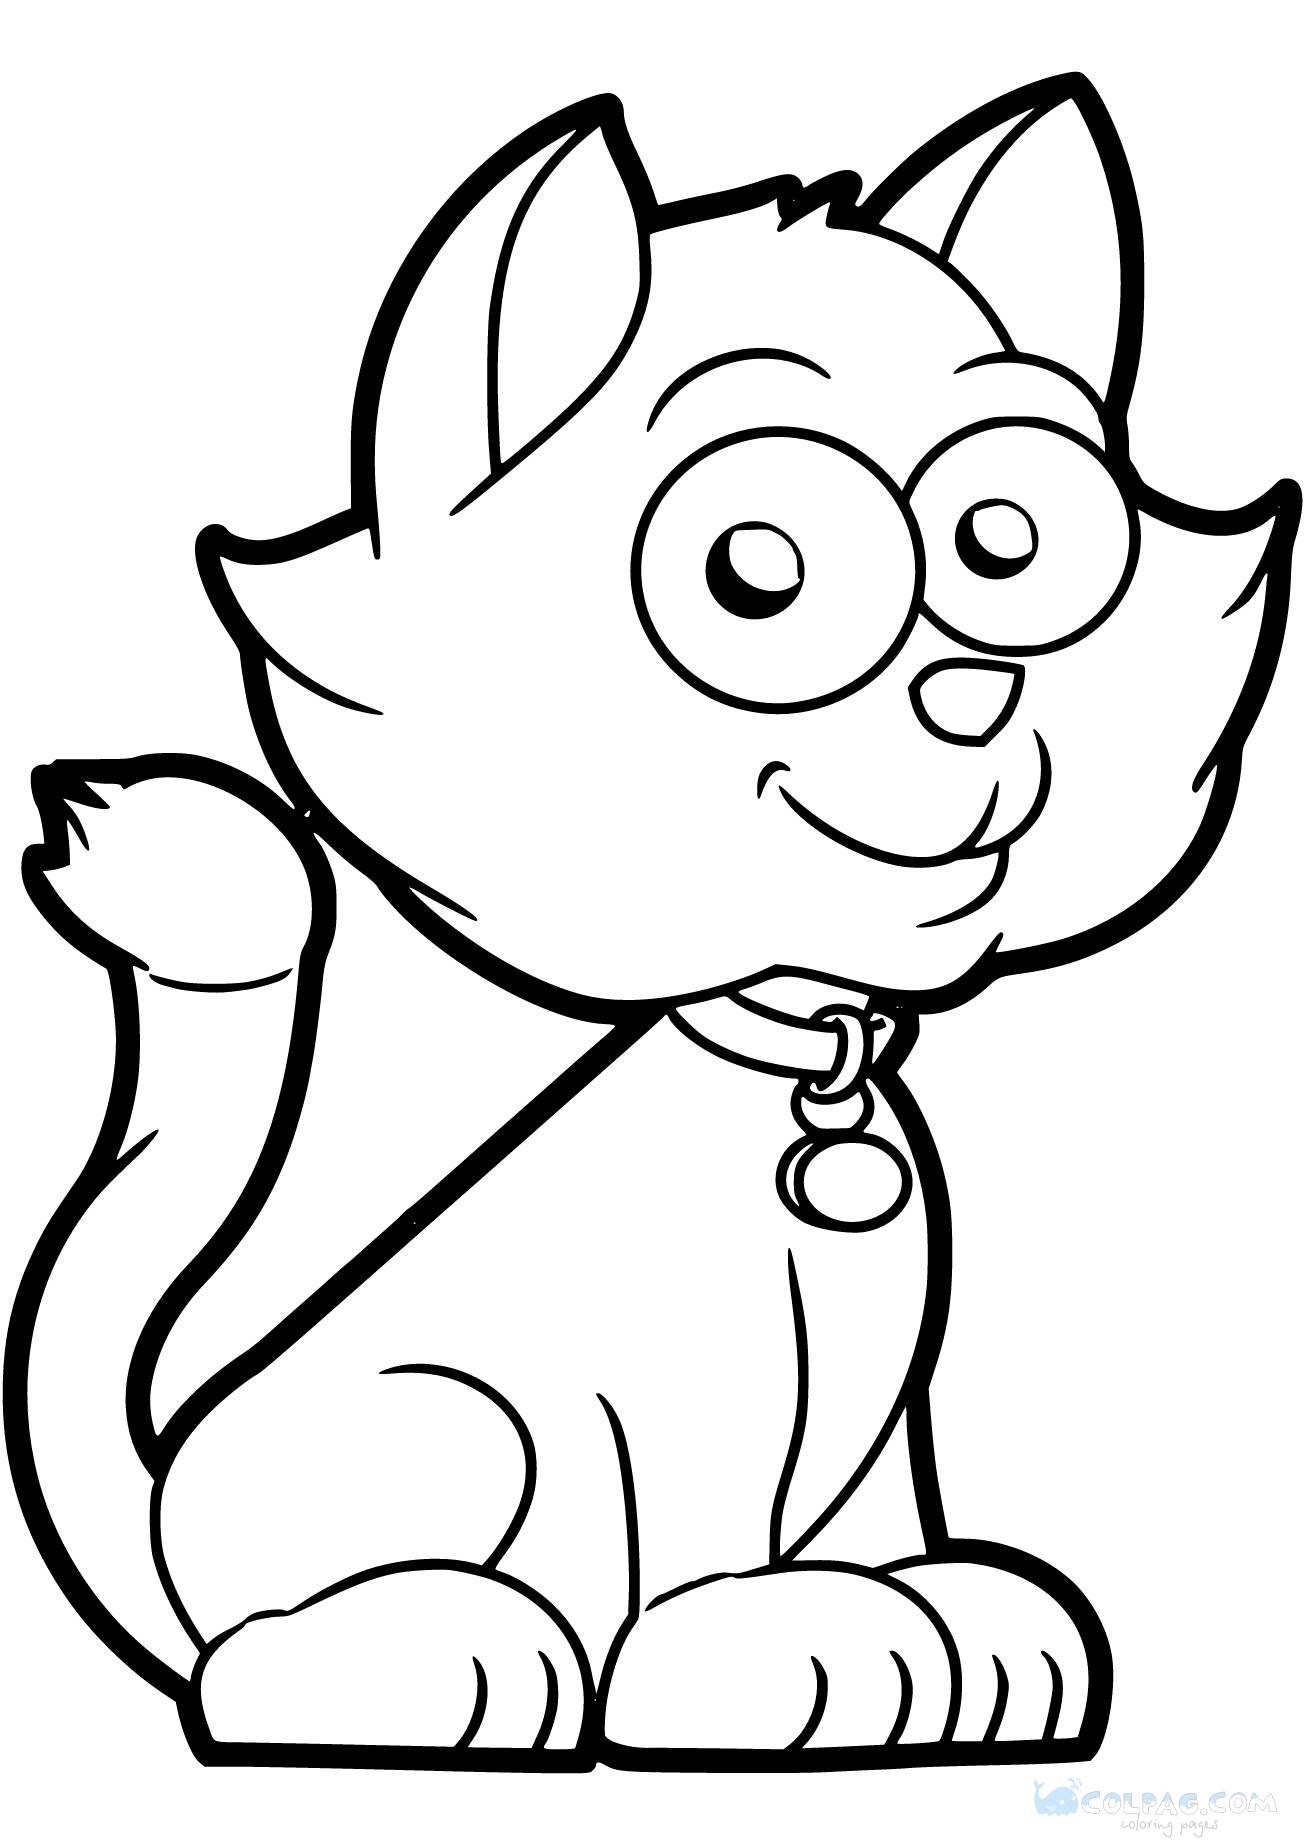 Coloring Pages of Cats to Print Online